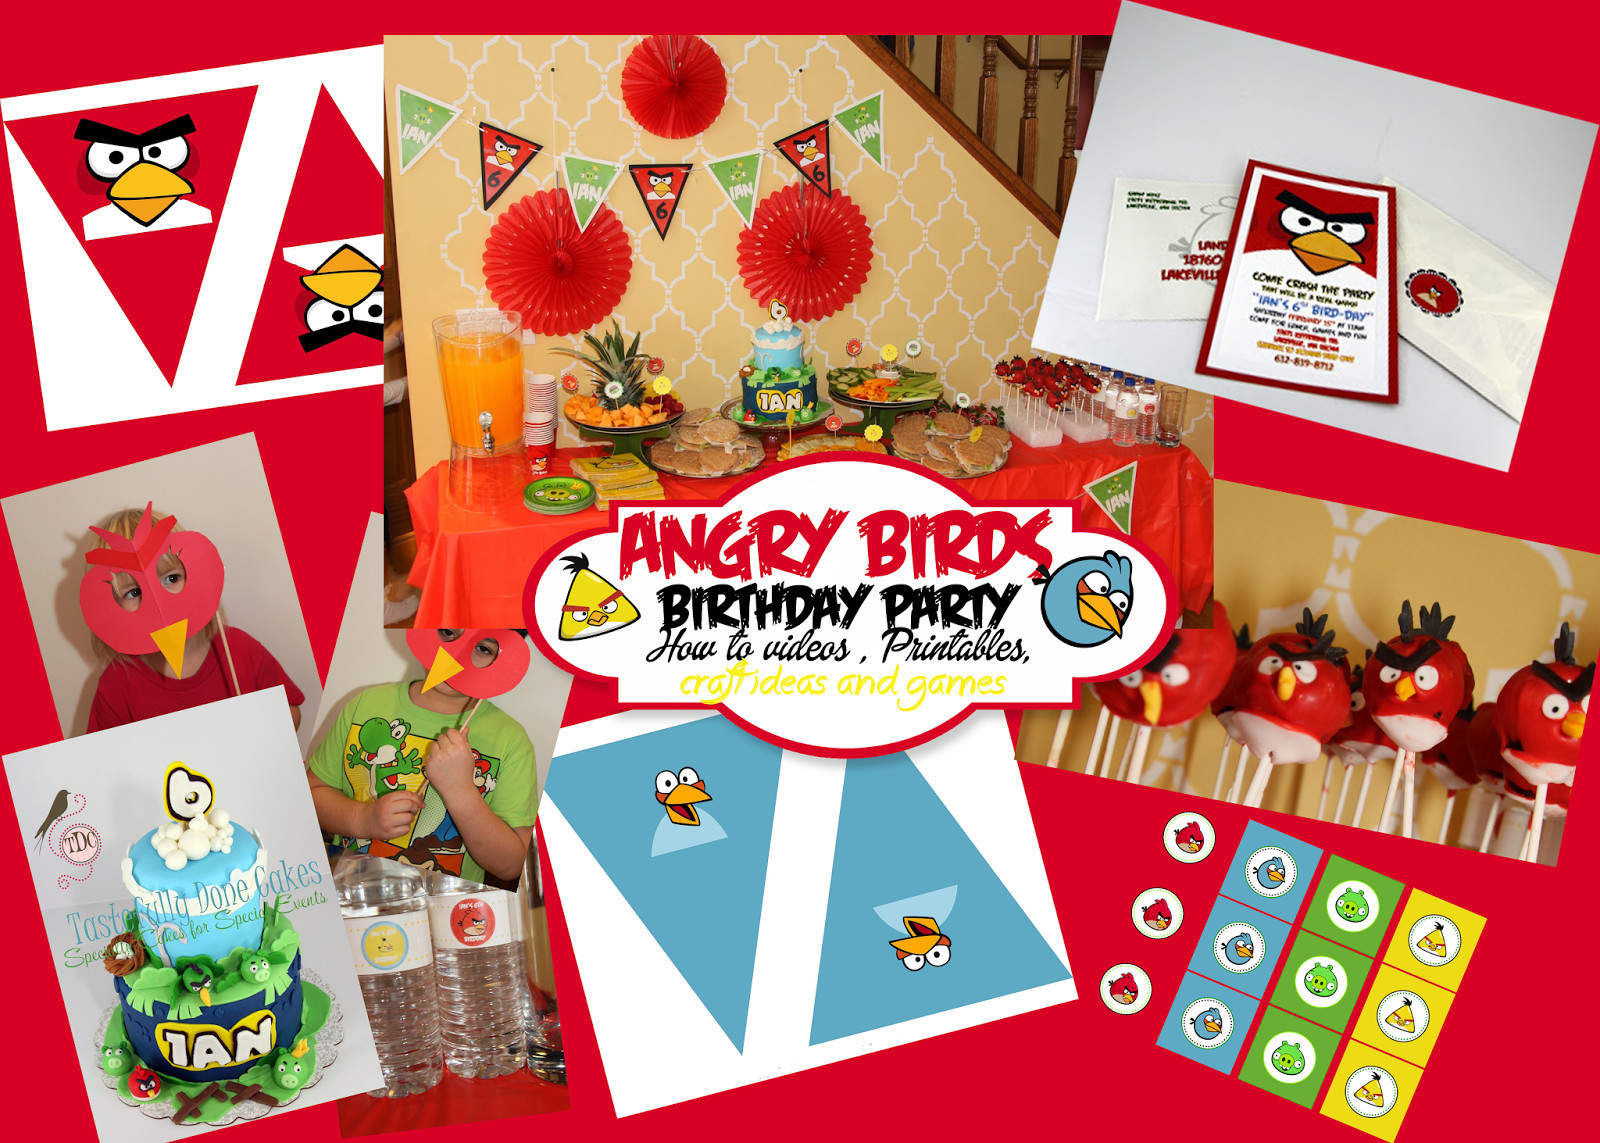 Angry Birds Birthday Party 6
 I Do A Dime Angry Birds Party